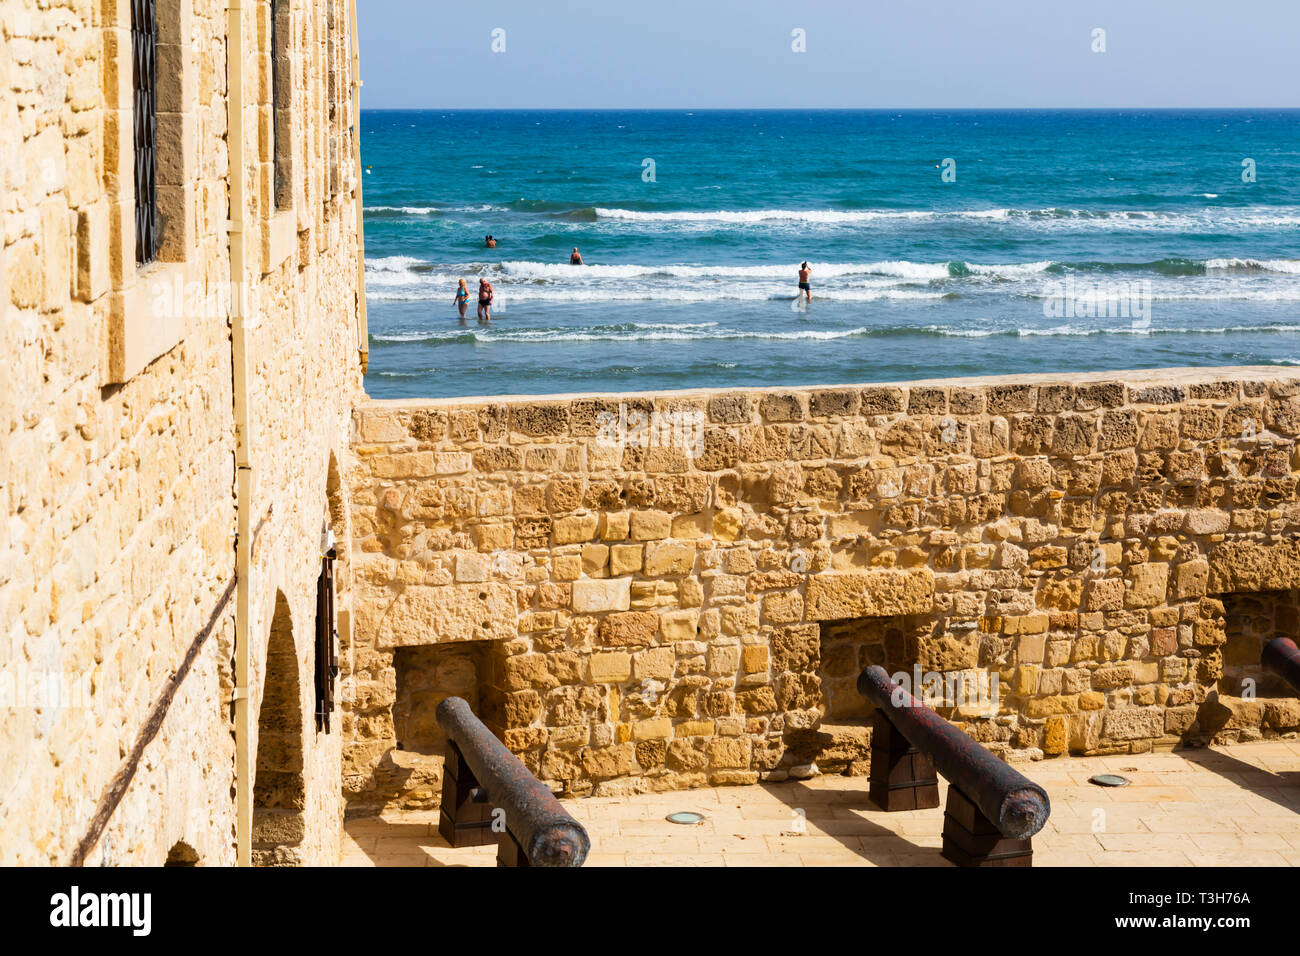 Courtyard of Larnaca Fort looking over the walls to the sea beyond with bathers in the surf.Cyprus October 2018 Stock Photo